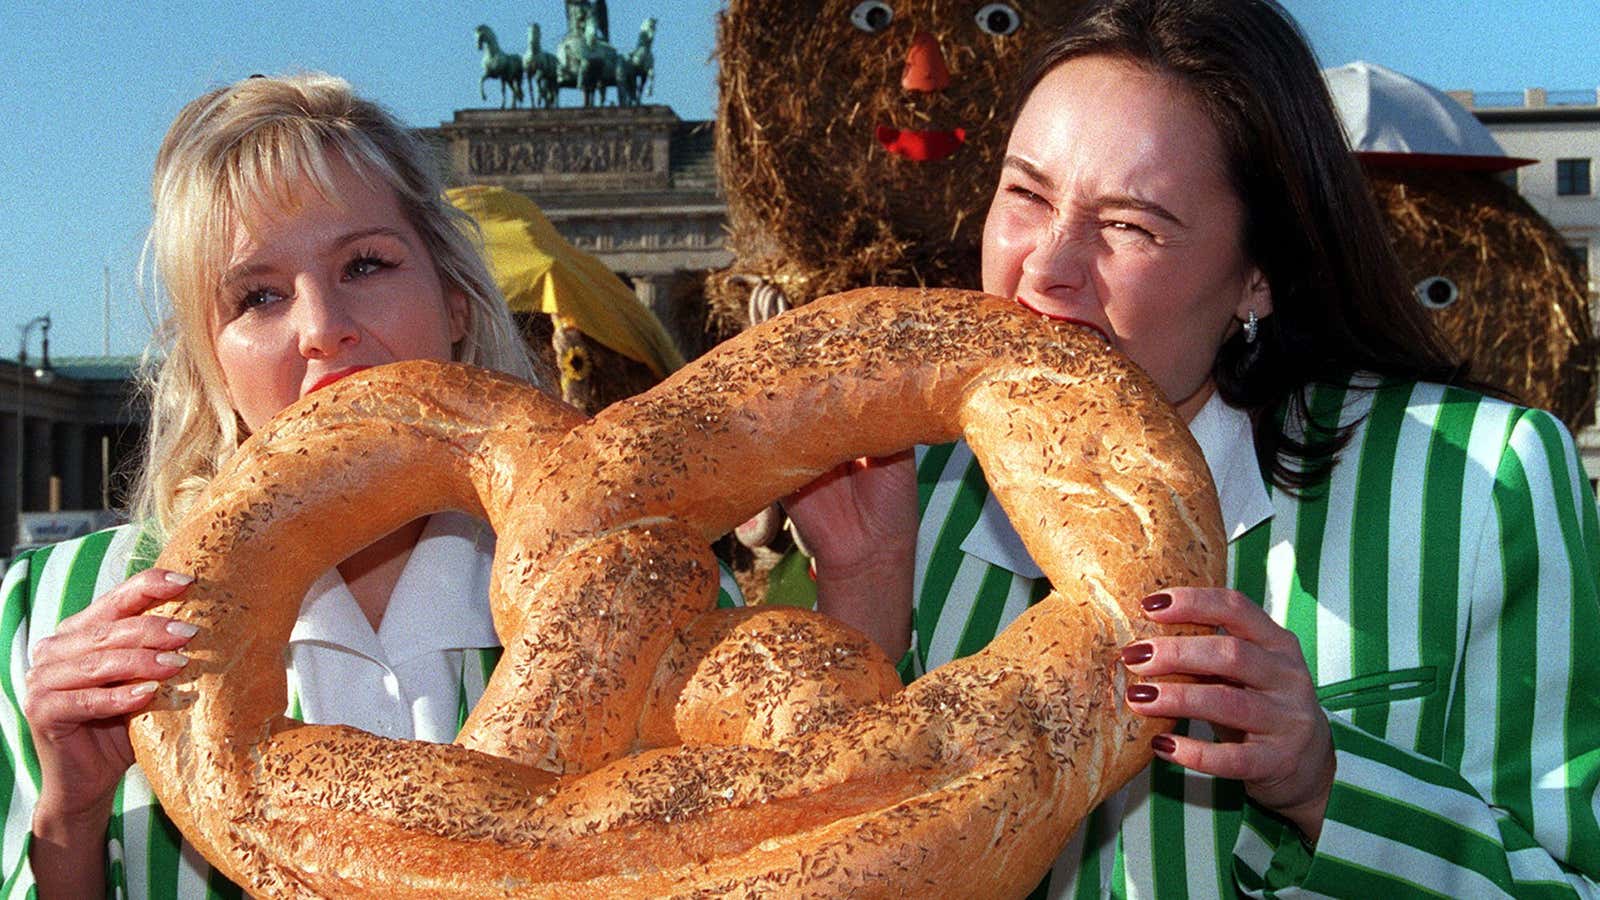 The pretzel recently crossed a billion dollars a year in sales.